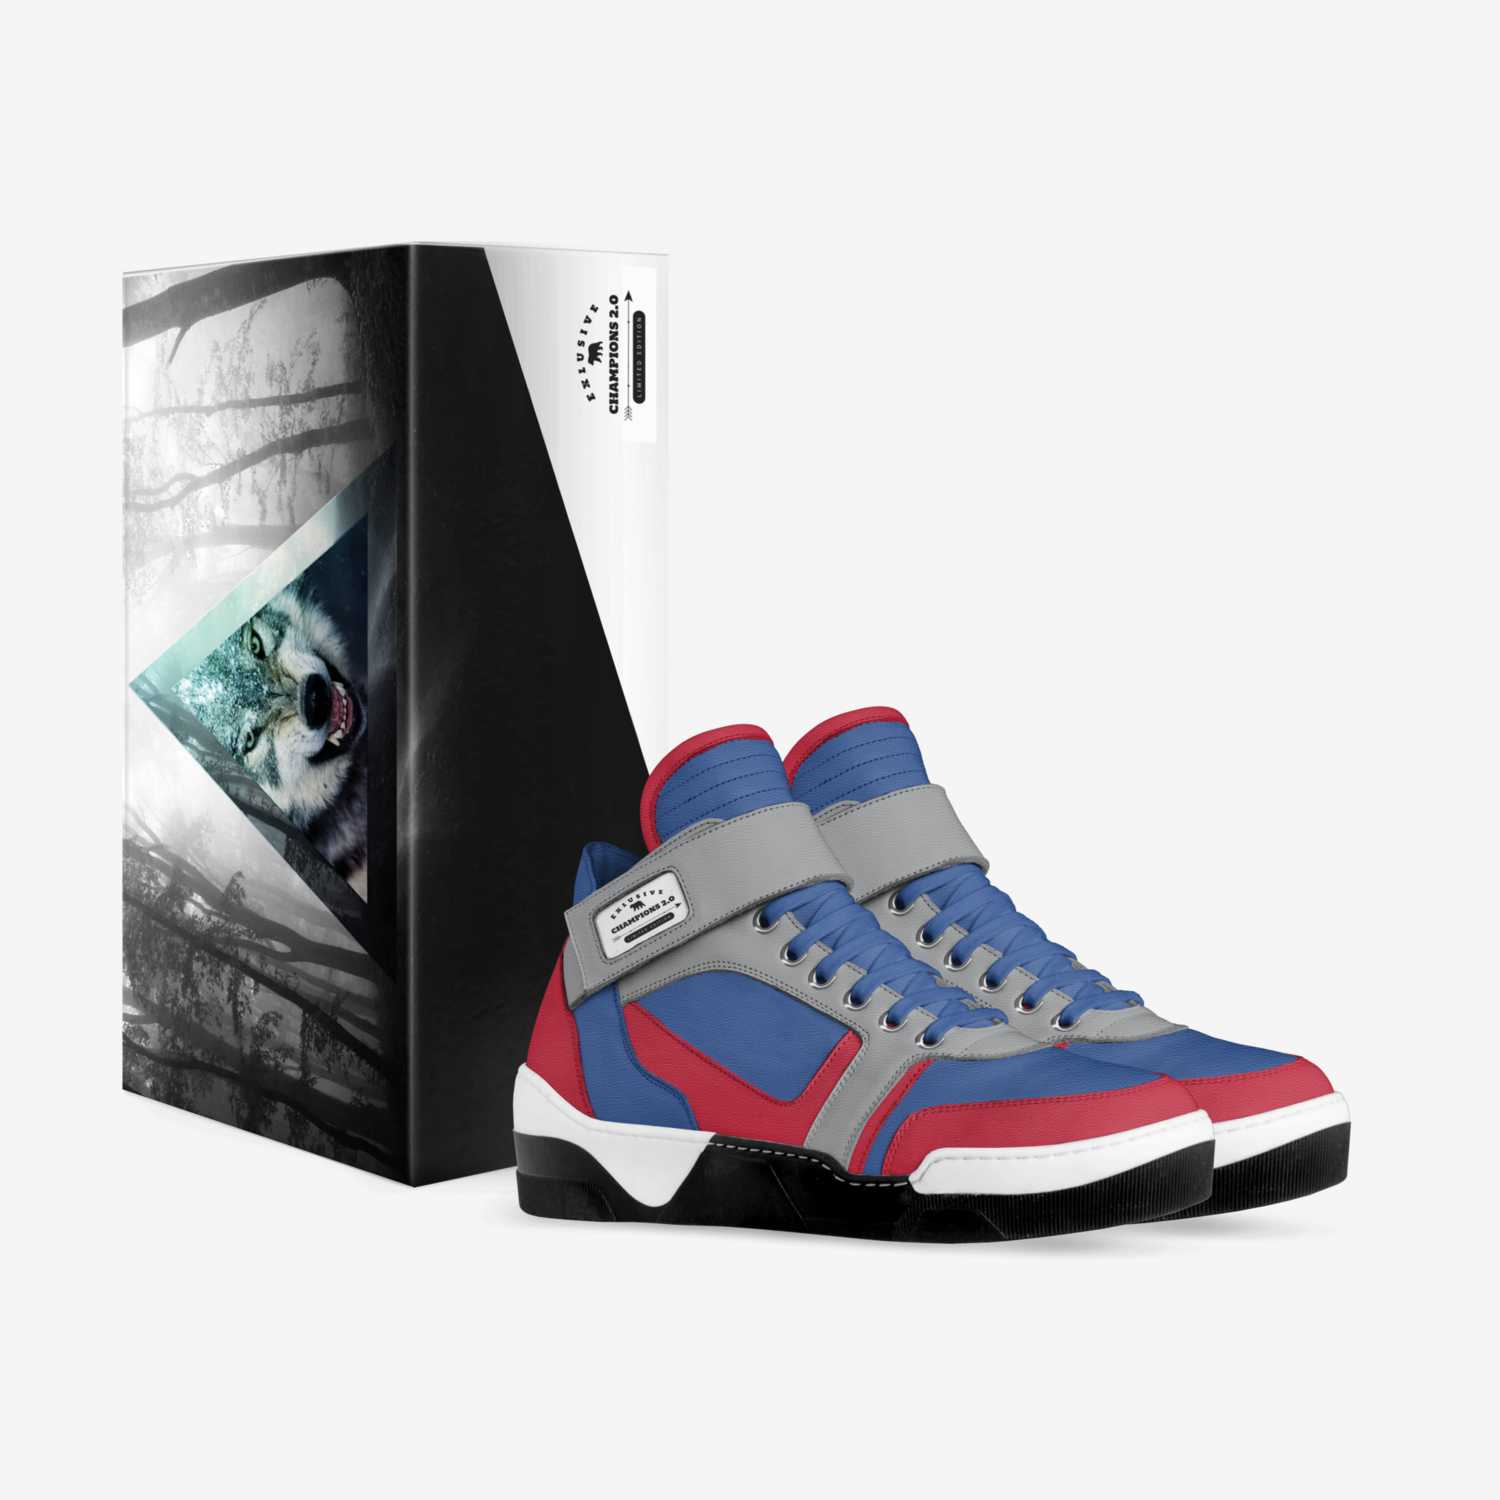 Champions 2.0 custom made in Italy shoes by Connorfg | Box view